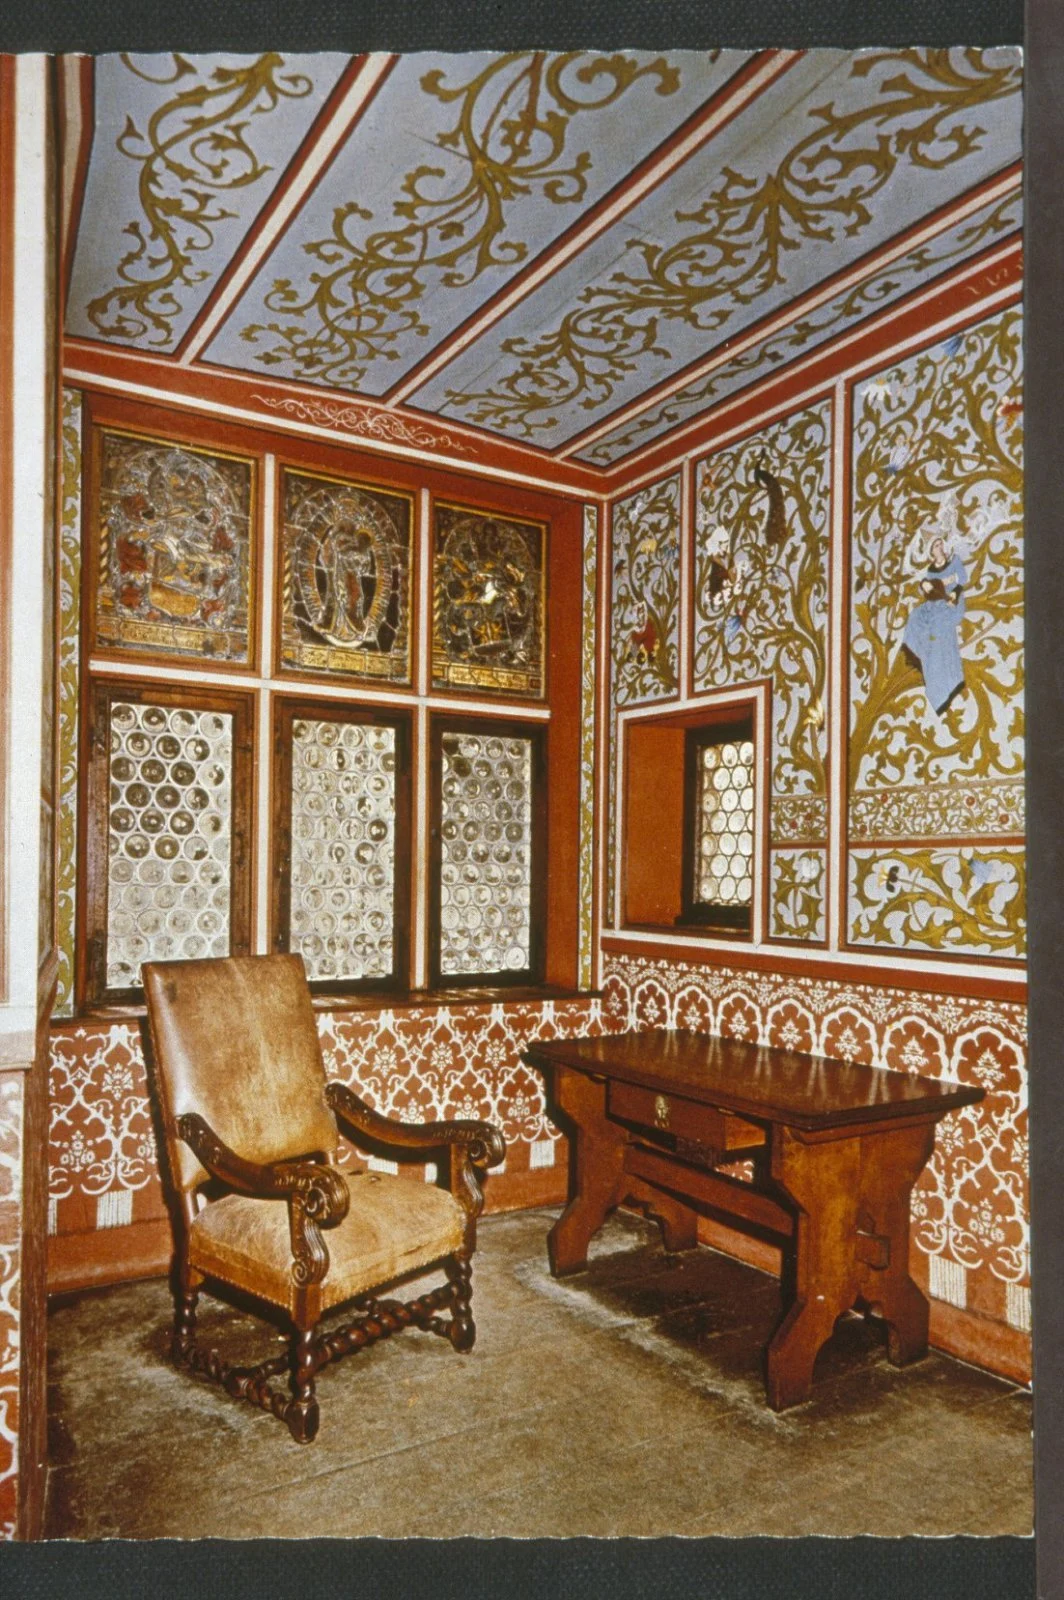 colour photograph of an interior room with richly decorated wall and ceiling paintings, and chair and table